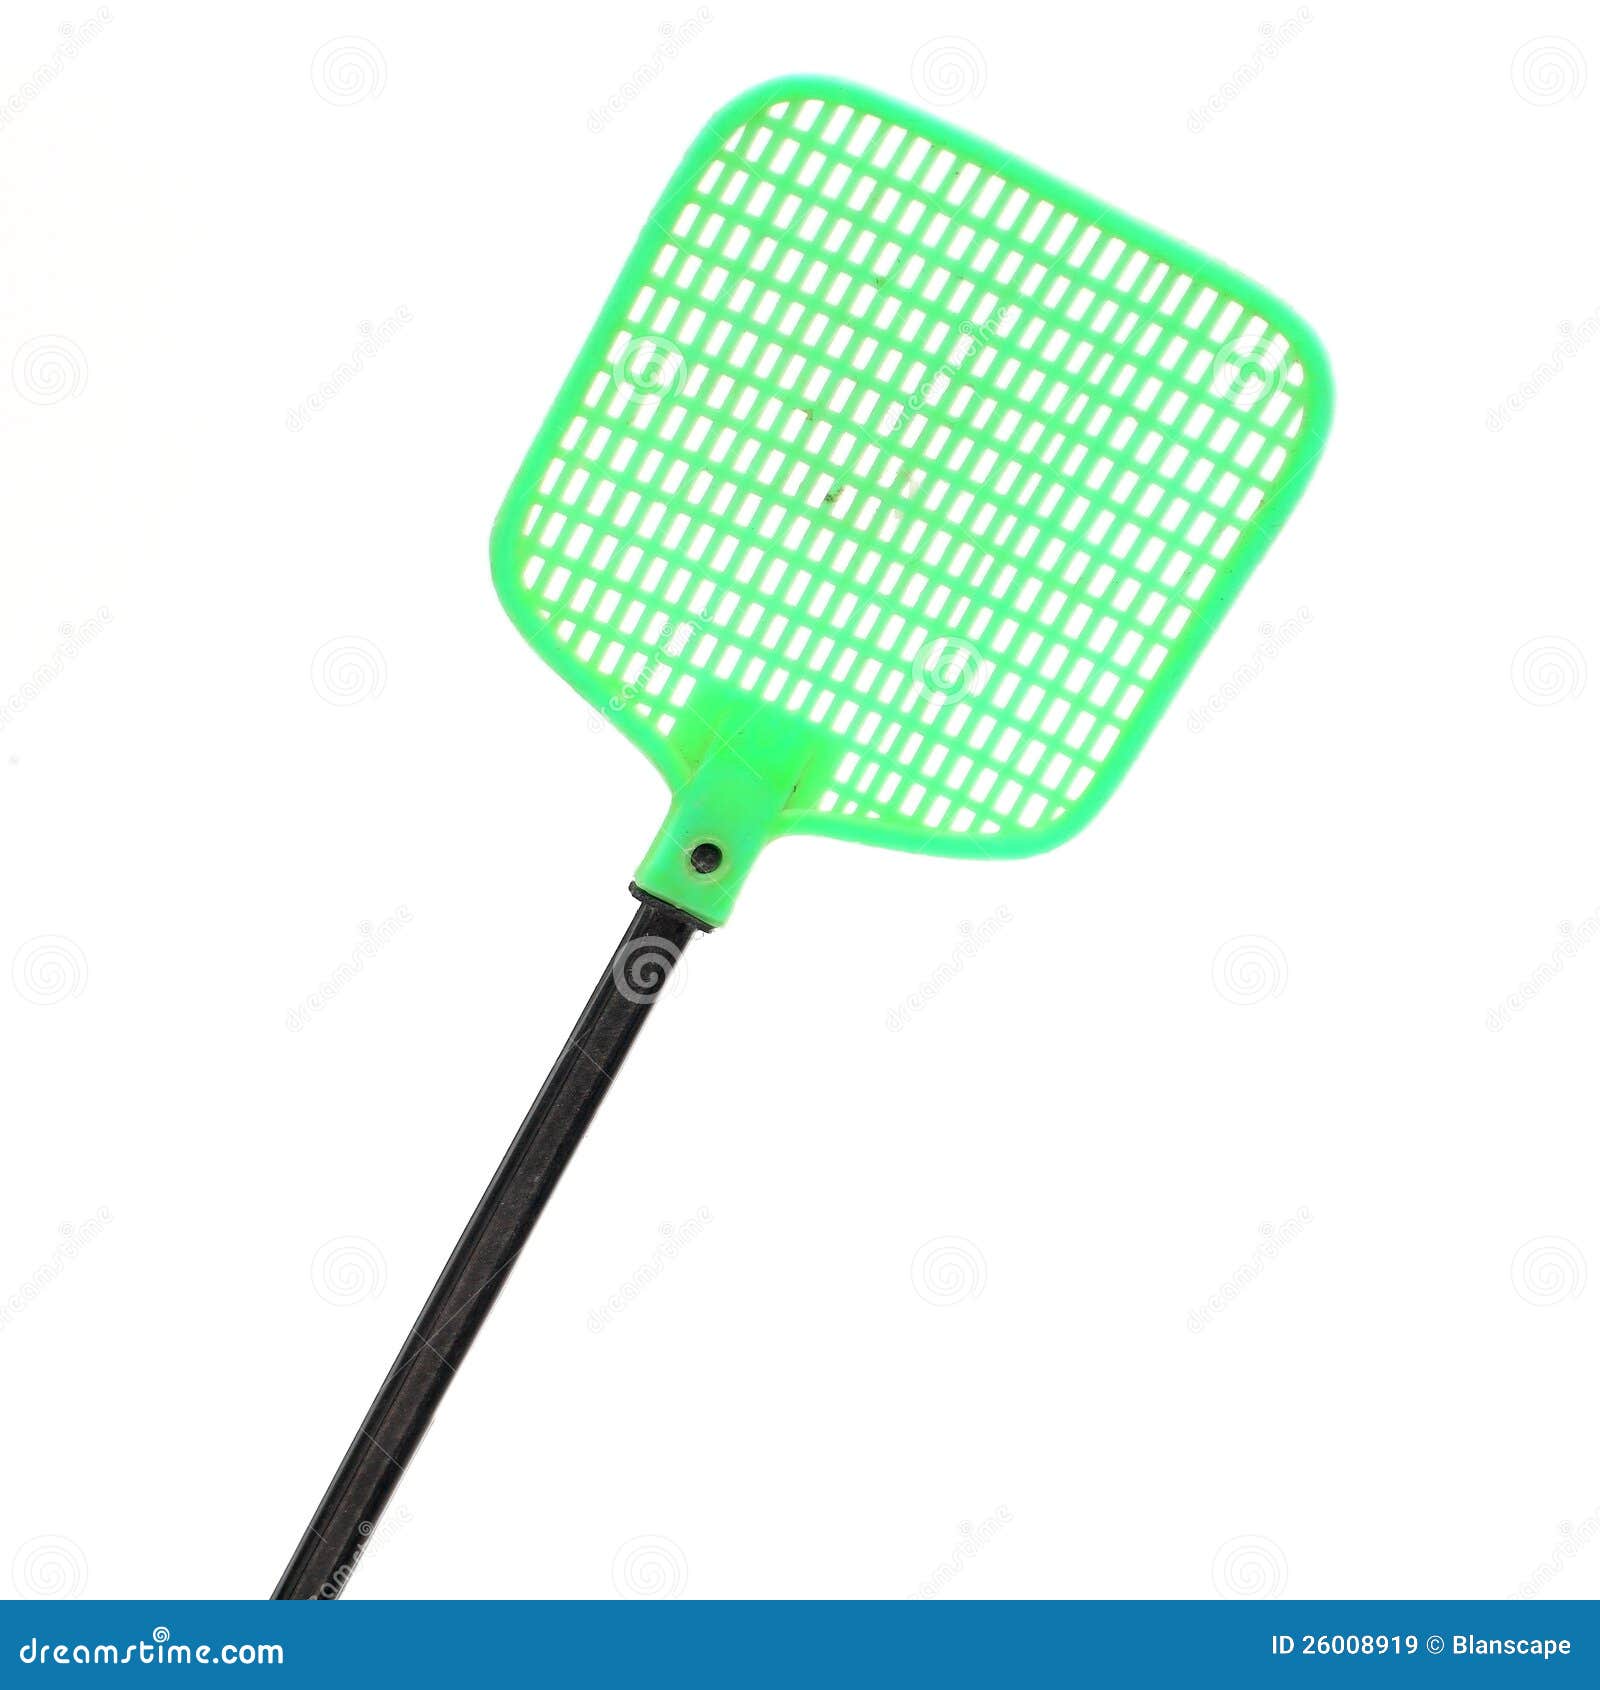 fly swat clipart - photo #14